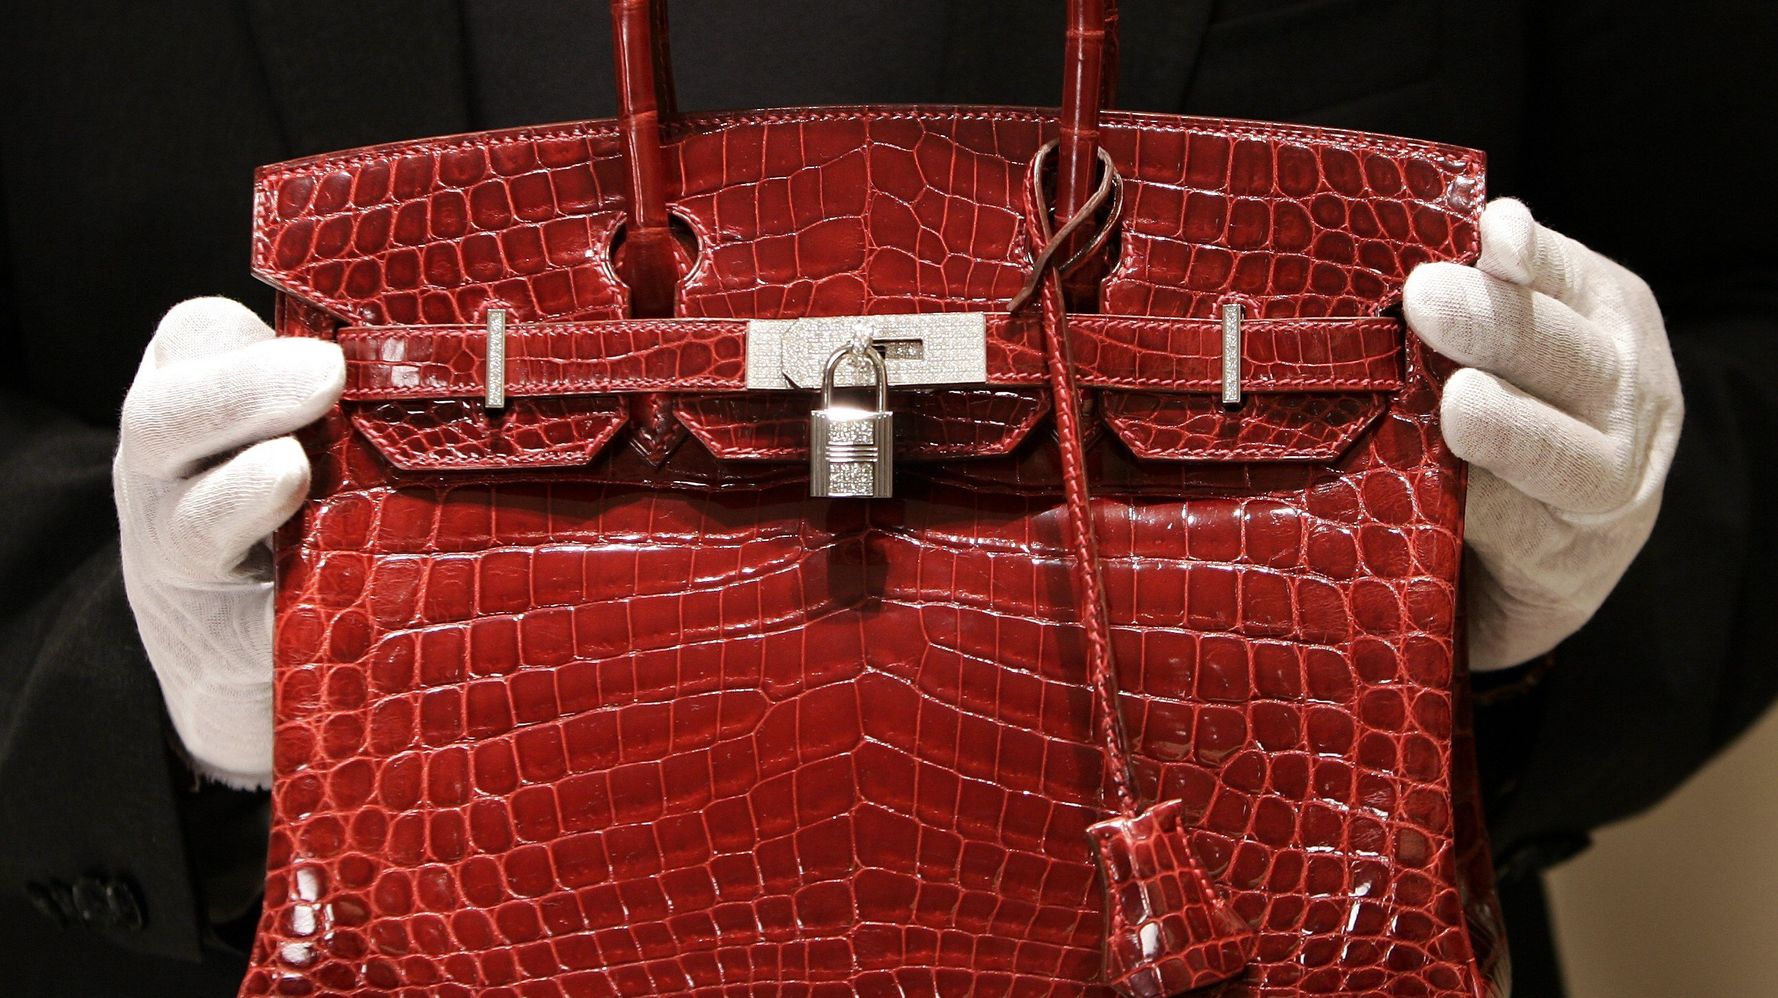 Hermes Handbags Are A Better Investment Than The Stock Market